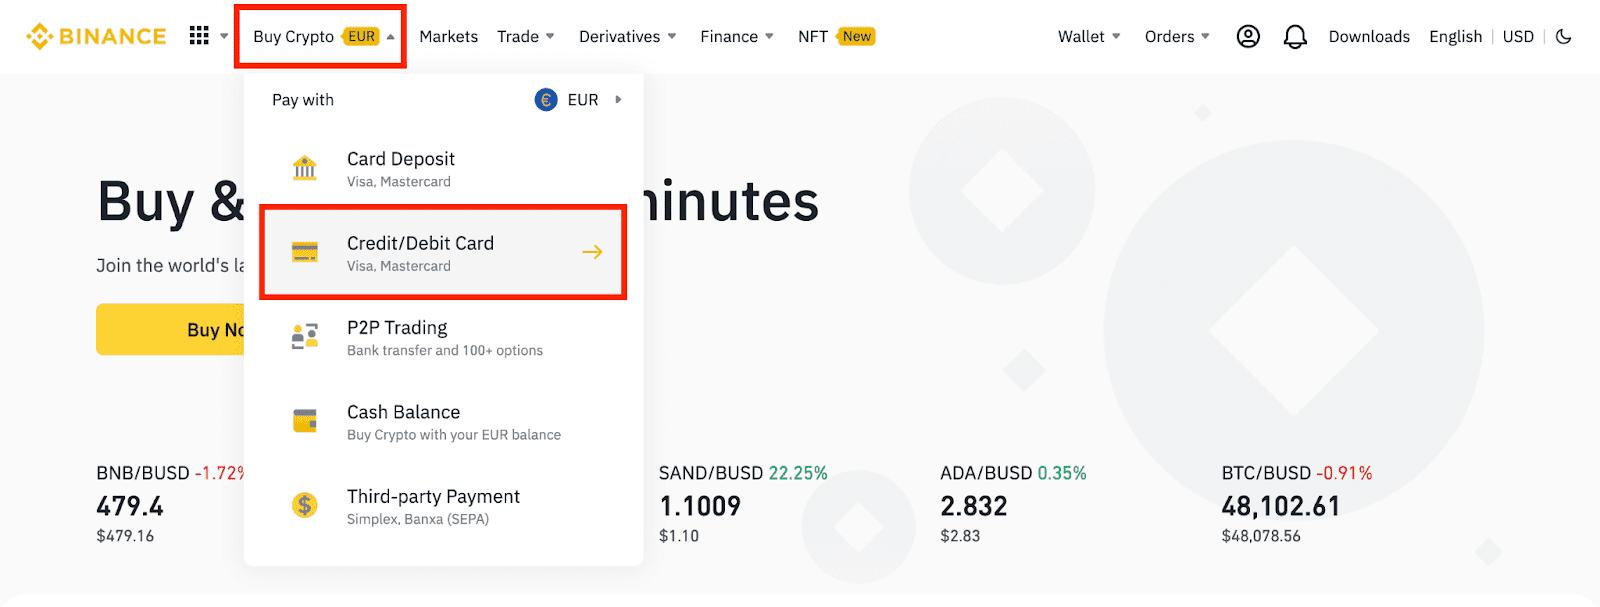 How to Sell and Buy Crypto on Binance